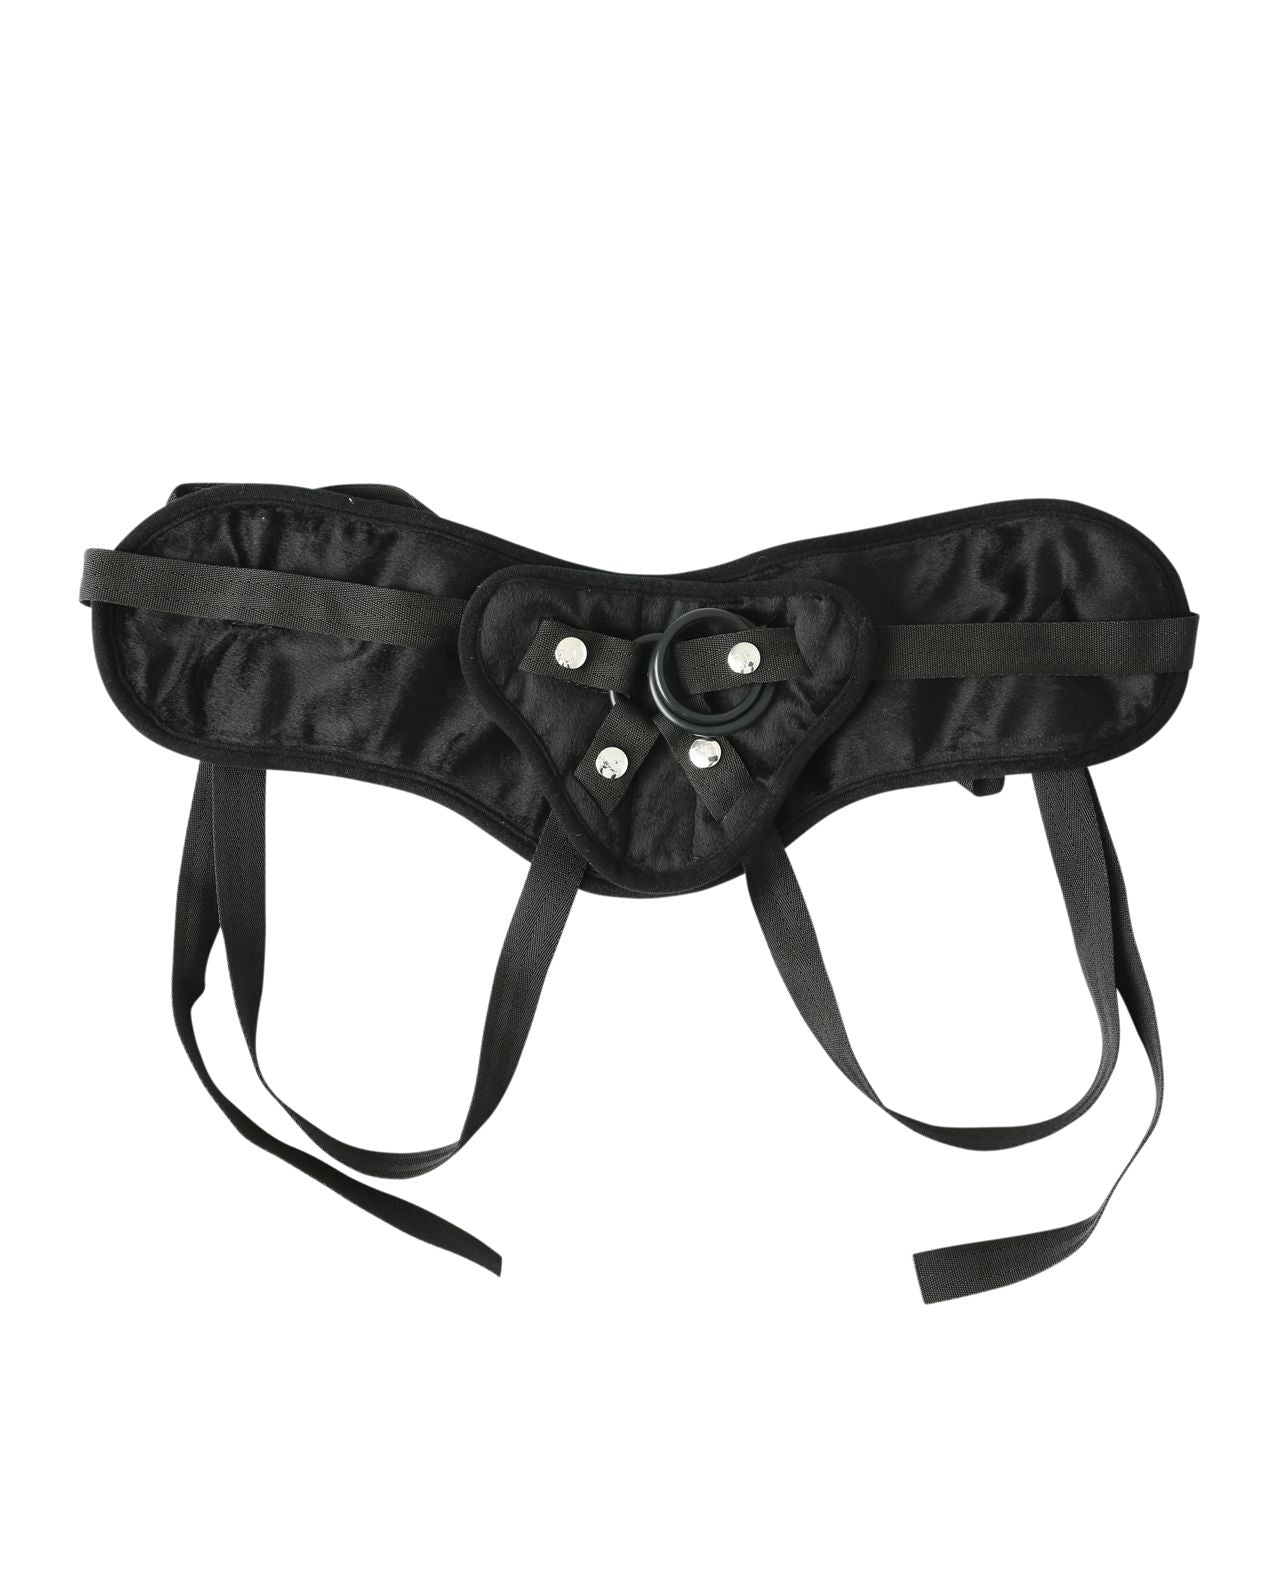 Plus Size Beginners Strap On Harness Shipmysextoys